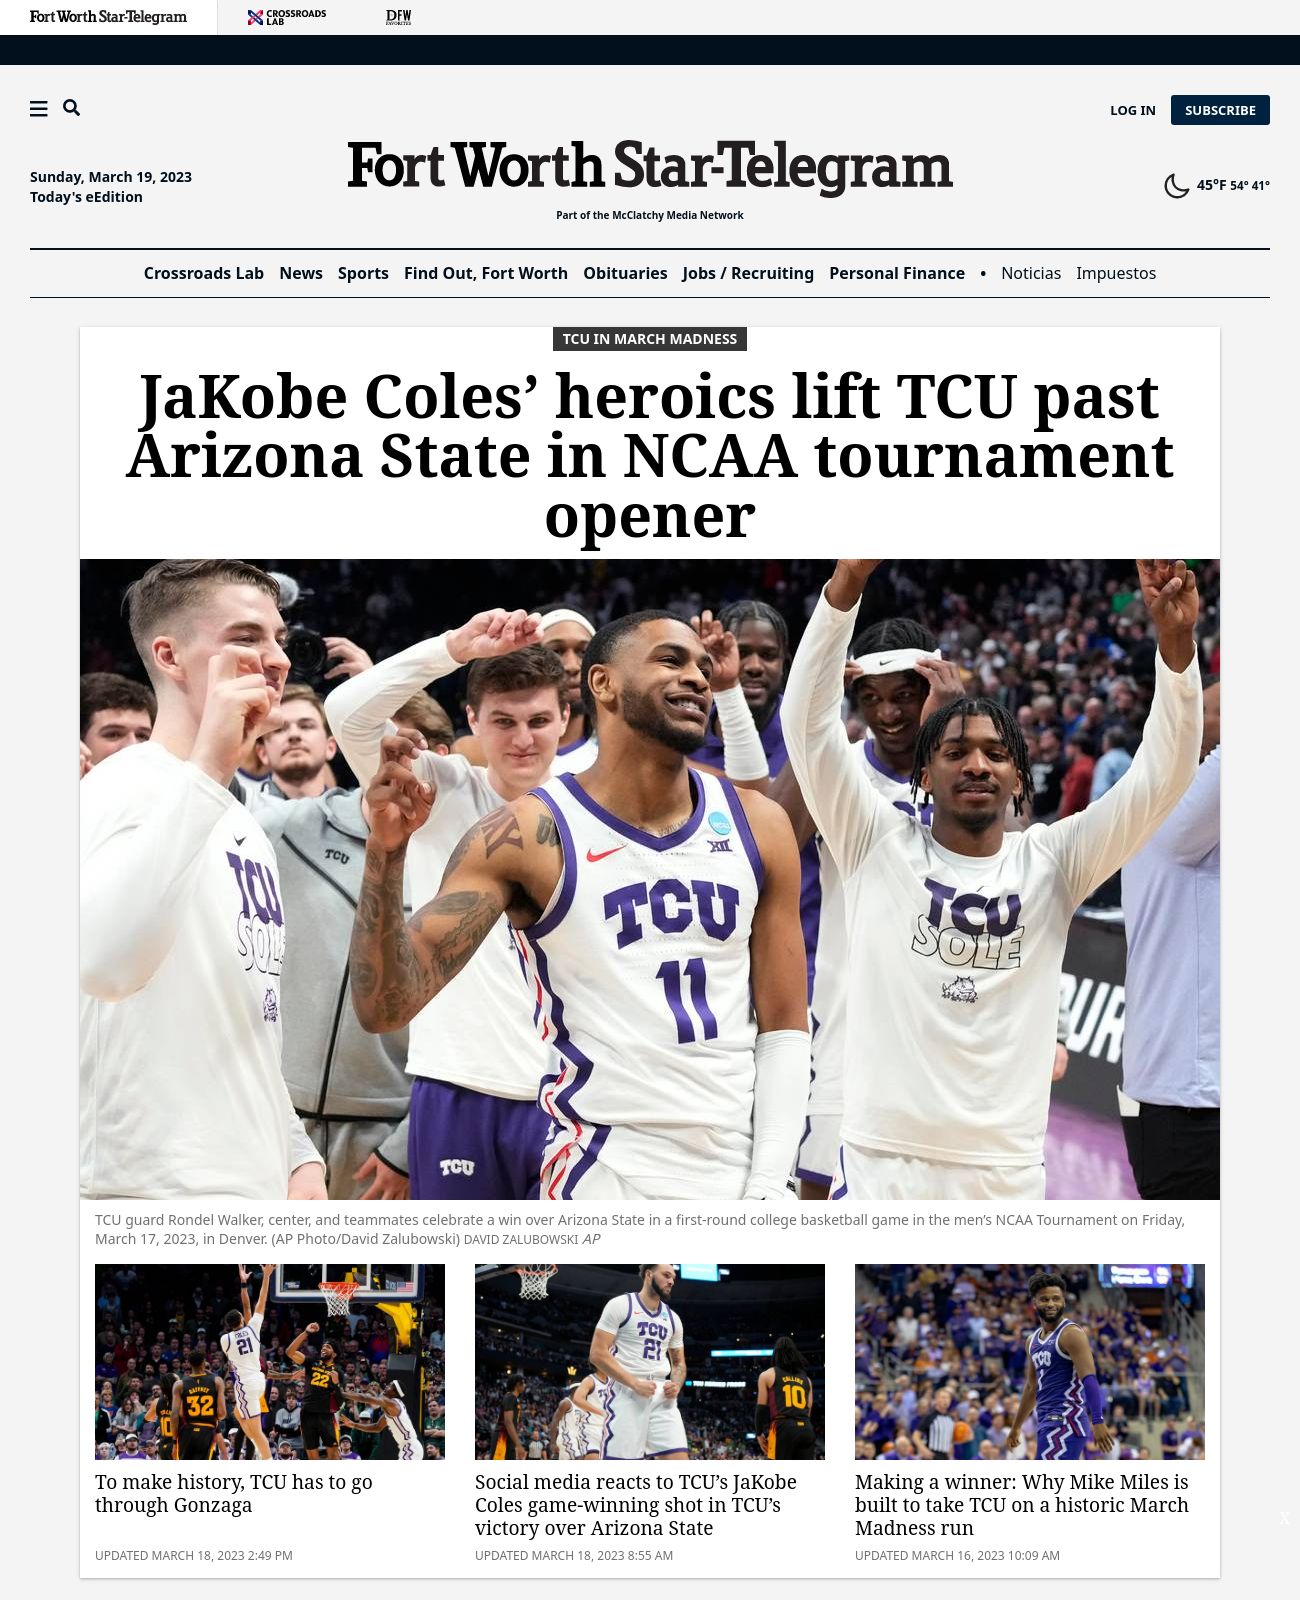 Fort Worth Star-Telegram at 2023-03-18 21:59:02-05:00 local time